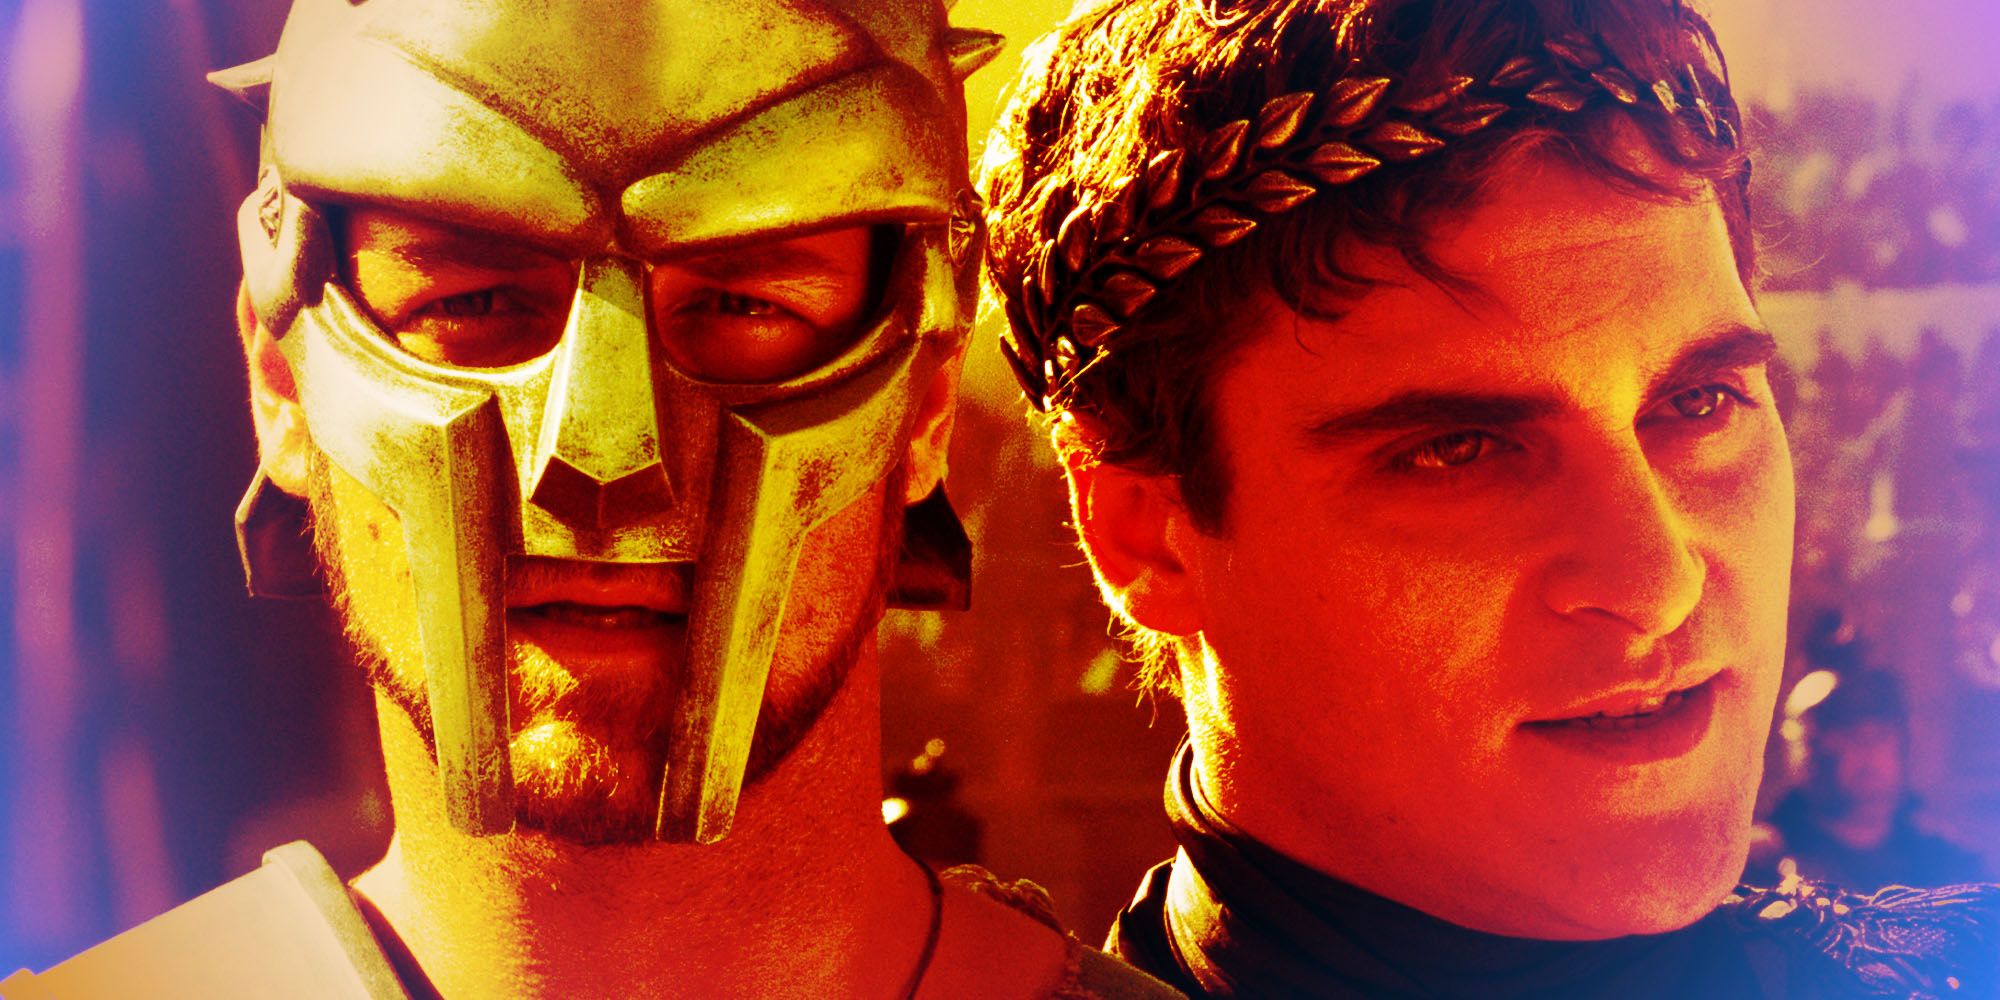 Blended, colored Russell Crowe and Joaquin Phoenix in Gladiator.